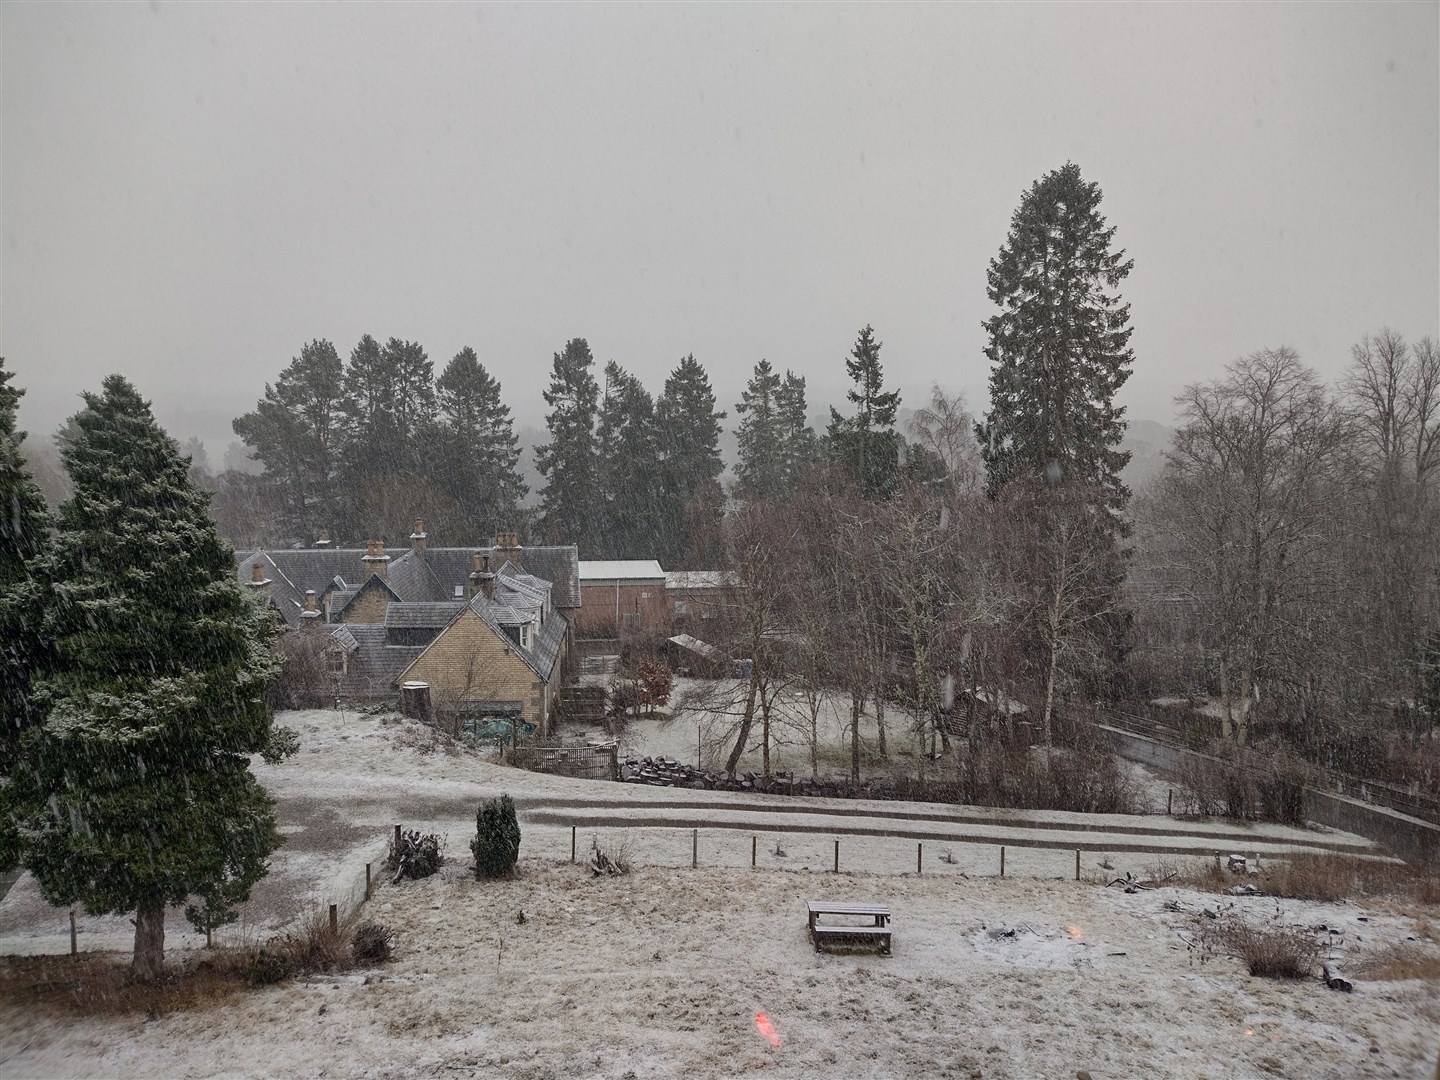 Snow is falling in Kincraig on Christmas Day